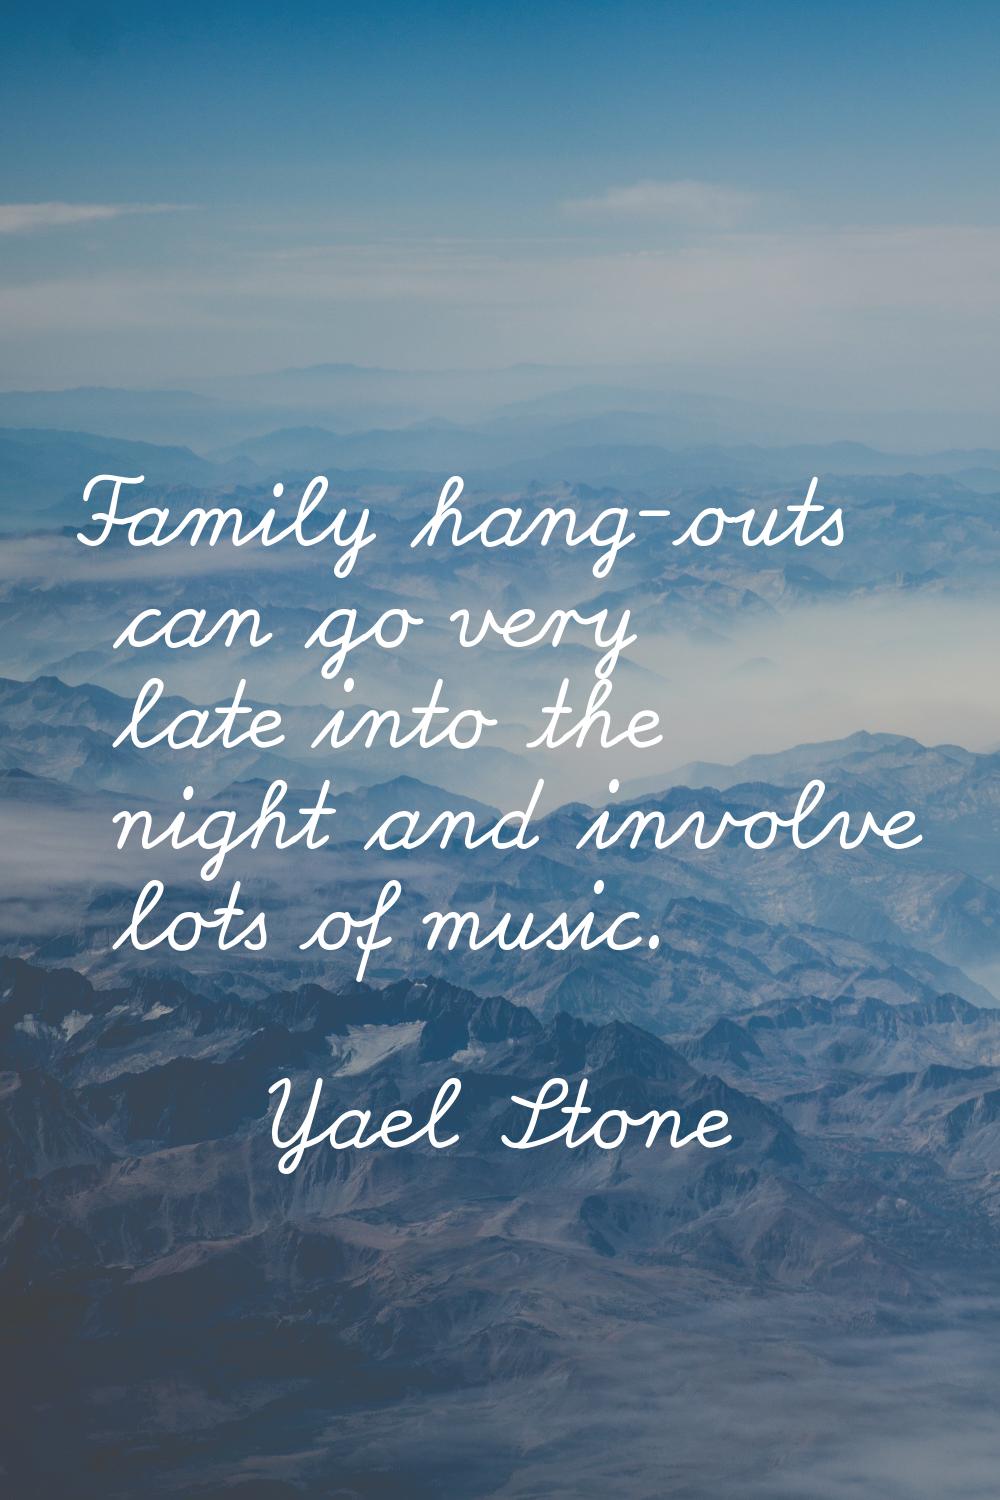 Family hang-outs can go very late into the night and involve lots of music.